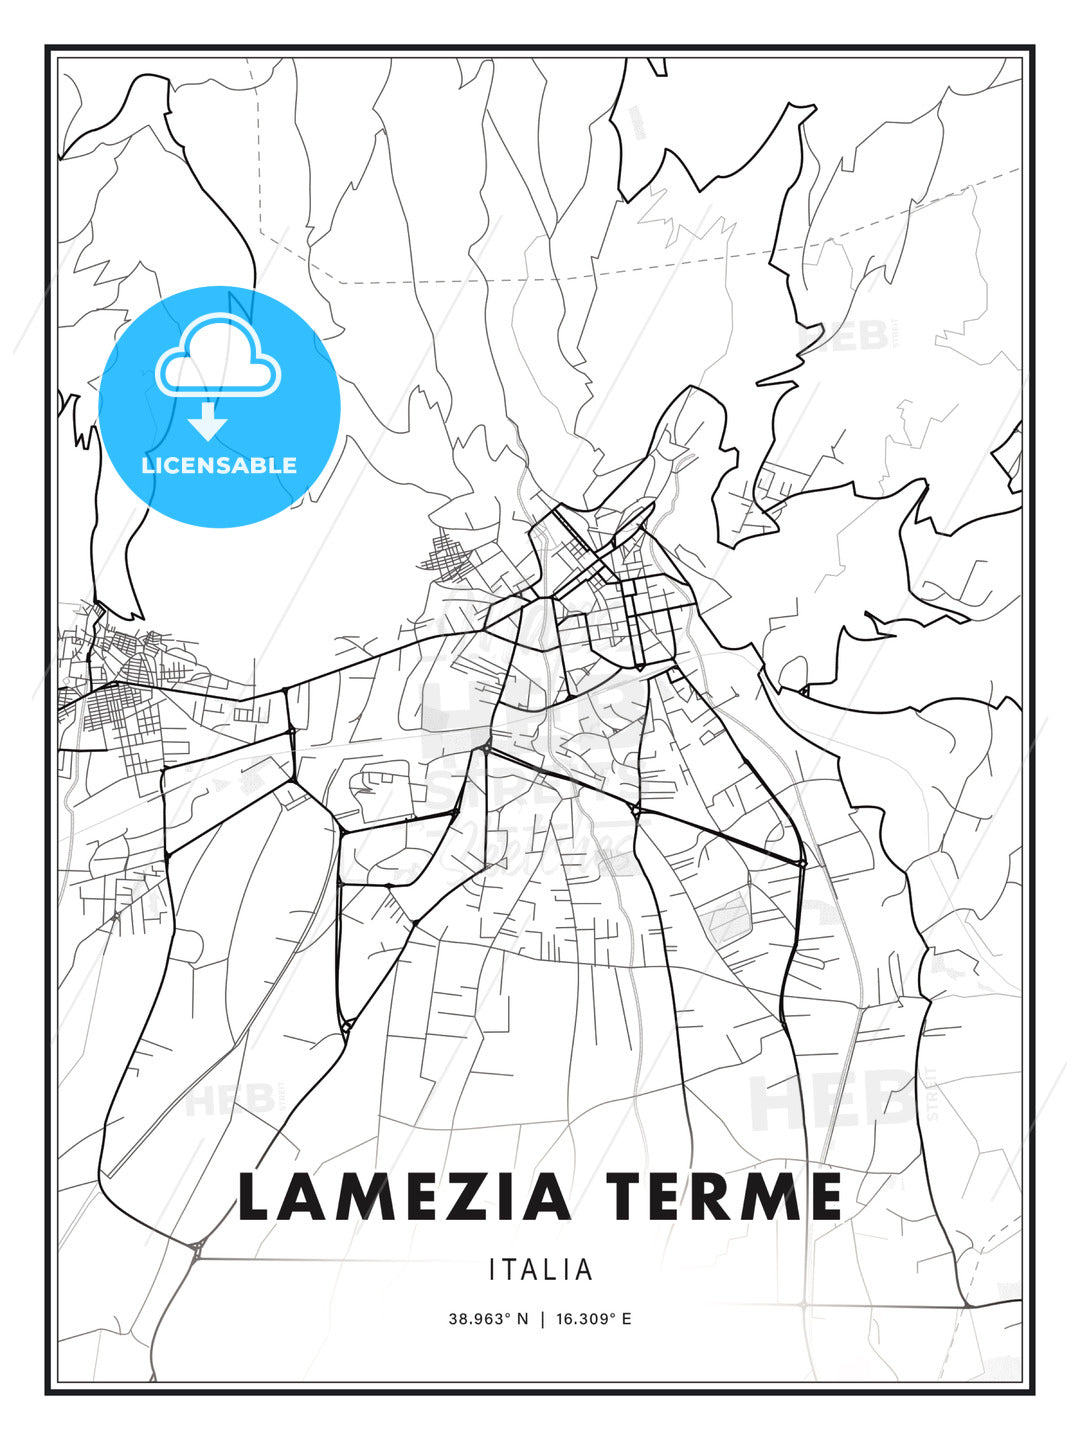 Lamezia Terme, Italy, Modern Print Template in Various Formats - HEBSTREITS Sketches